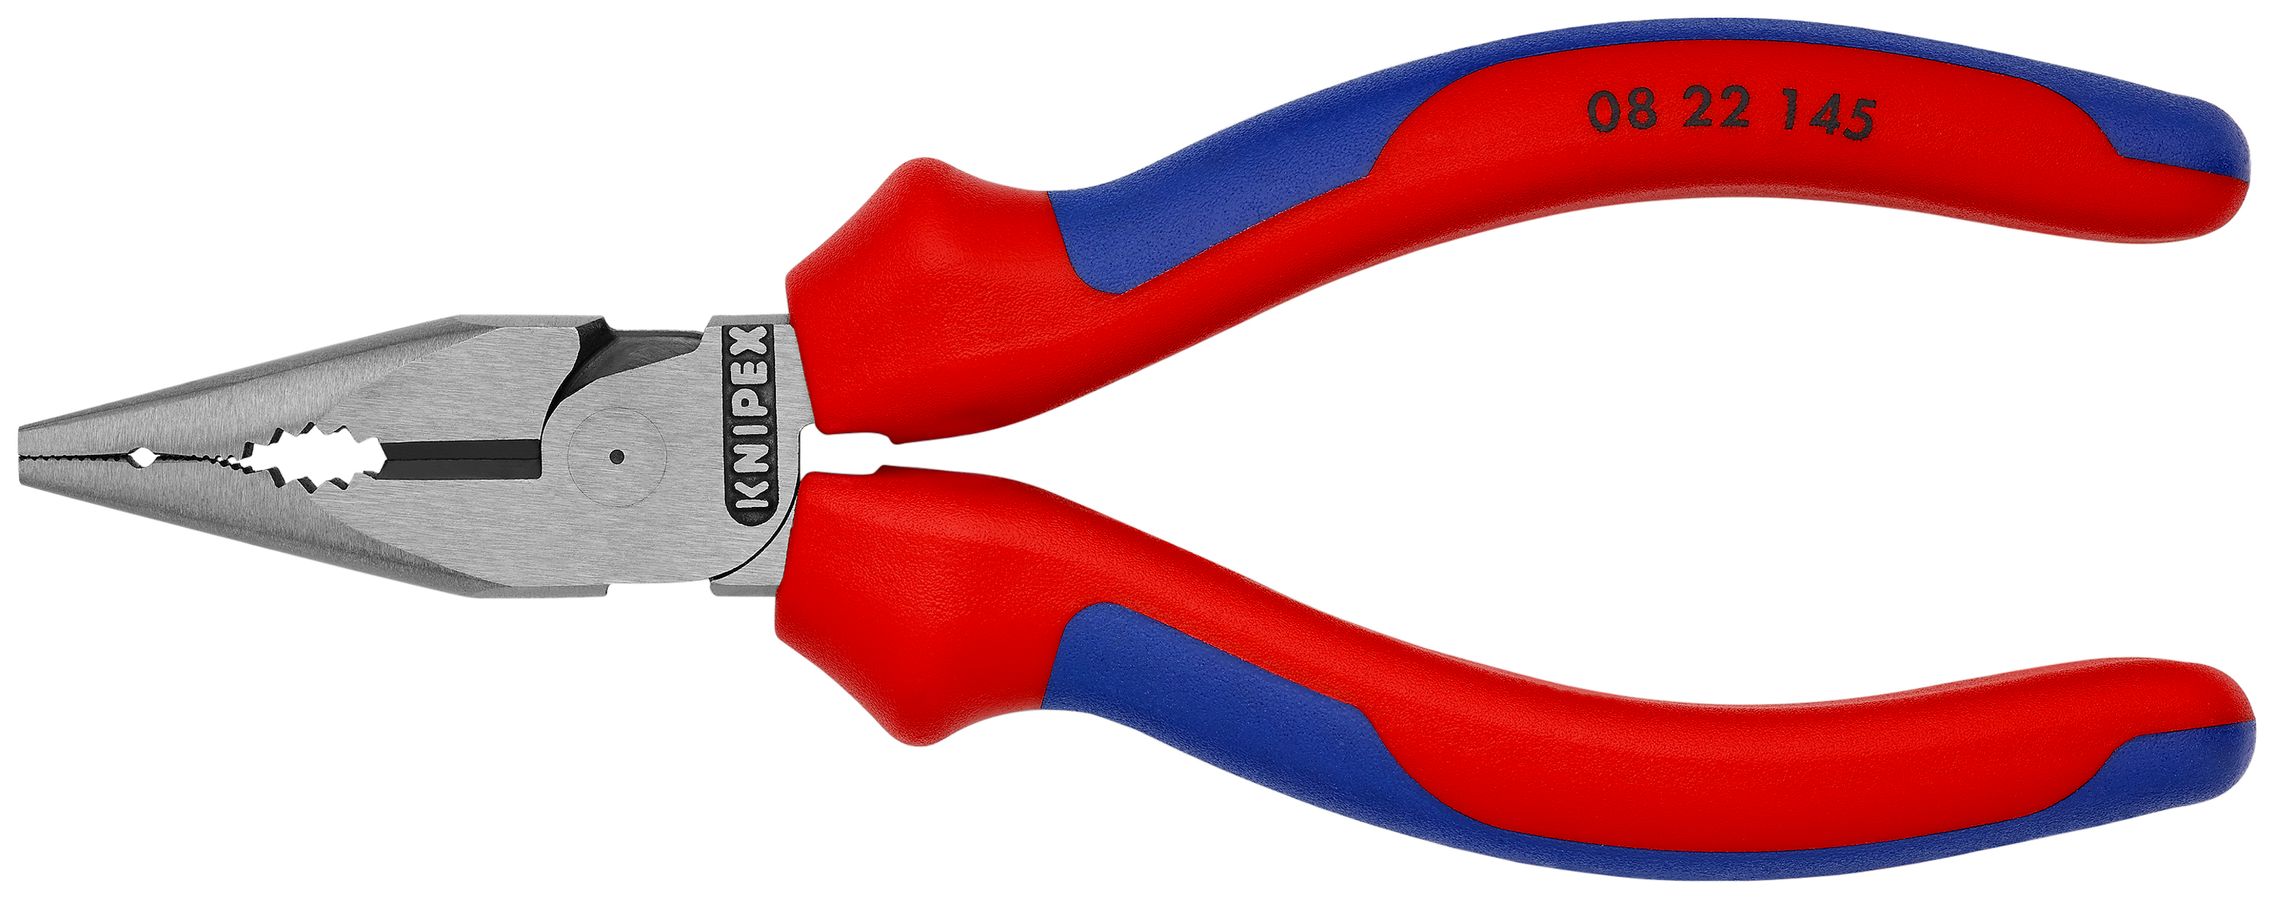 KNIPEX Needle Nose Combination Pliers with Soft Handle NO.0822145 -  AliExpress